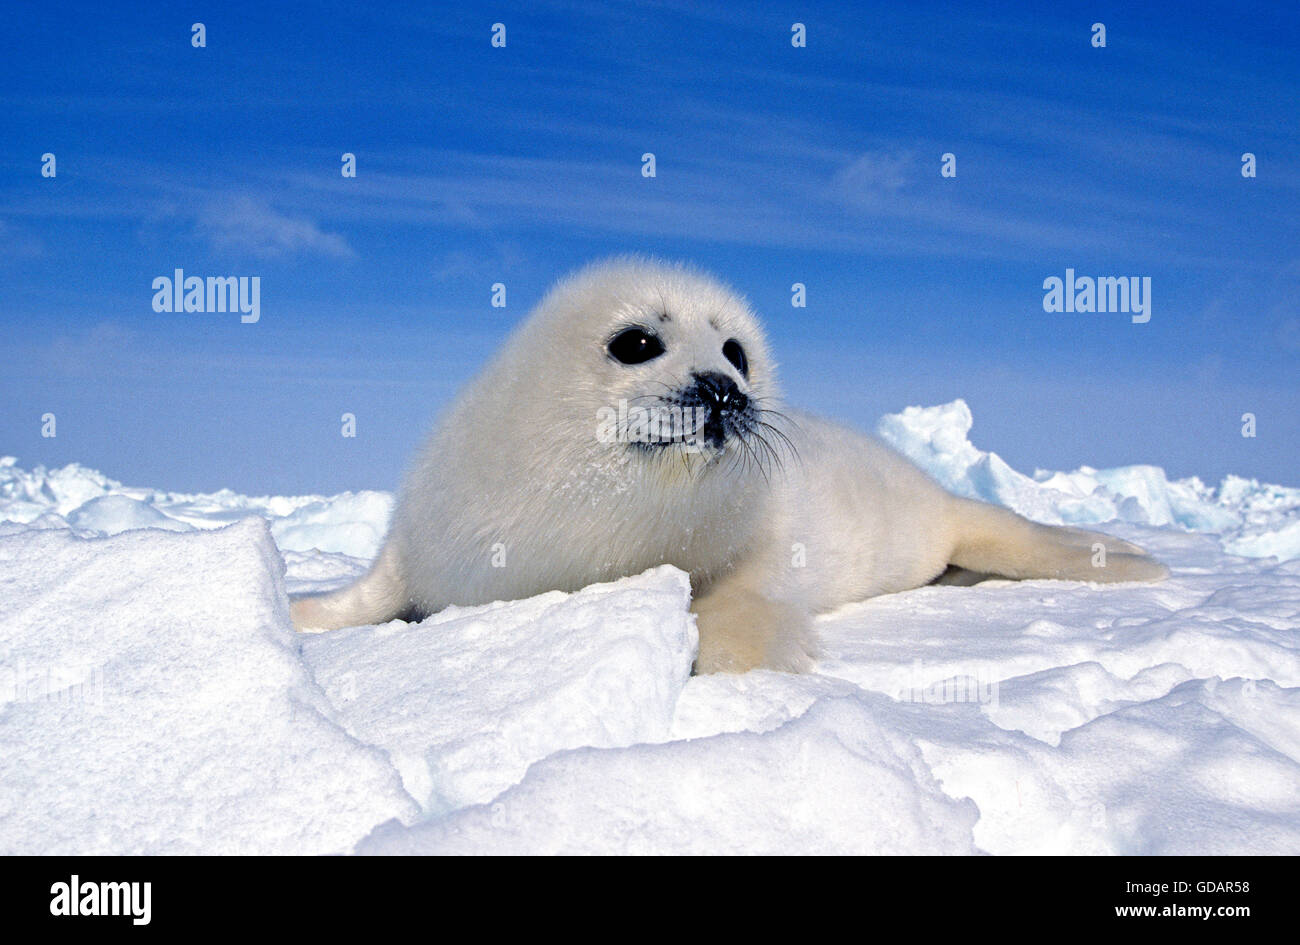 Guarnizione arpa, pagophilus groenlandicus, Pup standng sulla Icefield, Magdalena isole in Canada Foto Stock